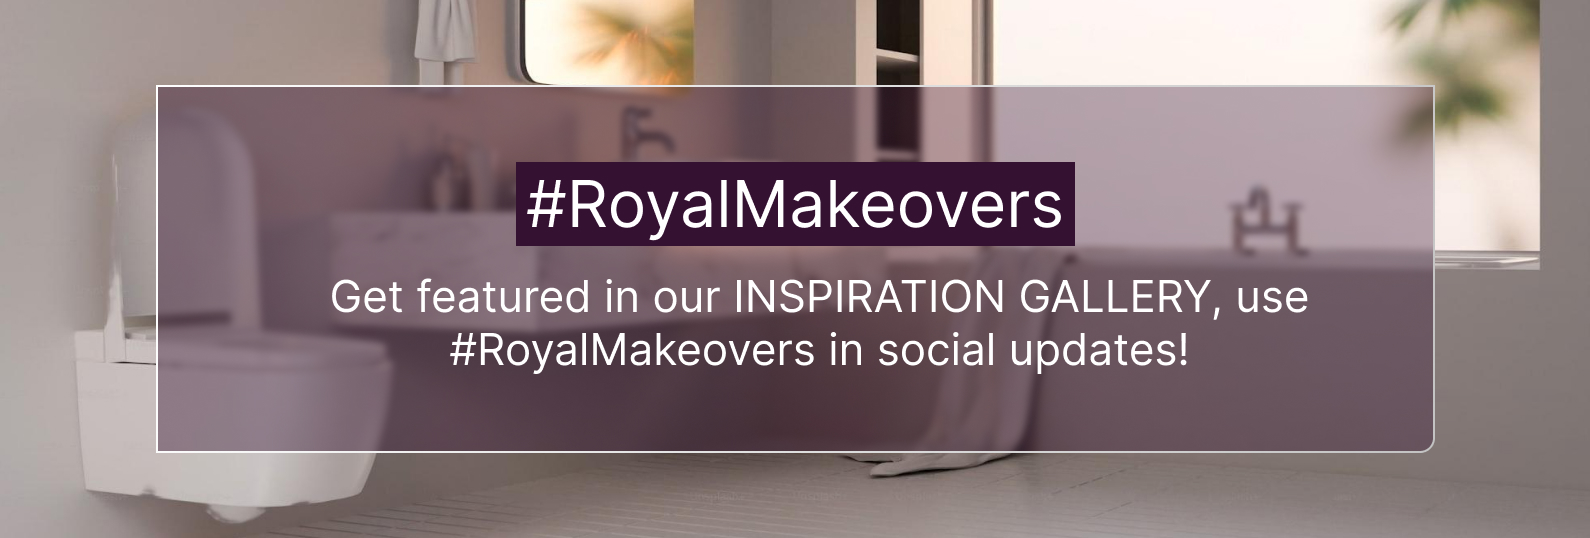 Get featured in our INSPIRATION GALLERY, use #RoyalMakeovers in social updates! 